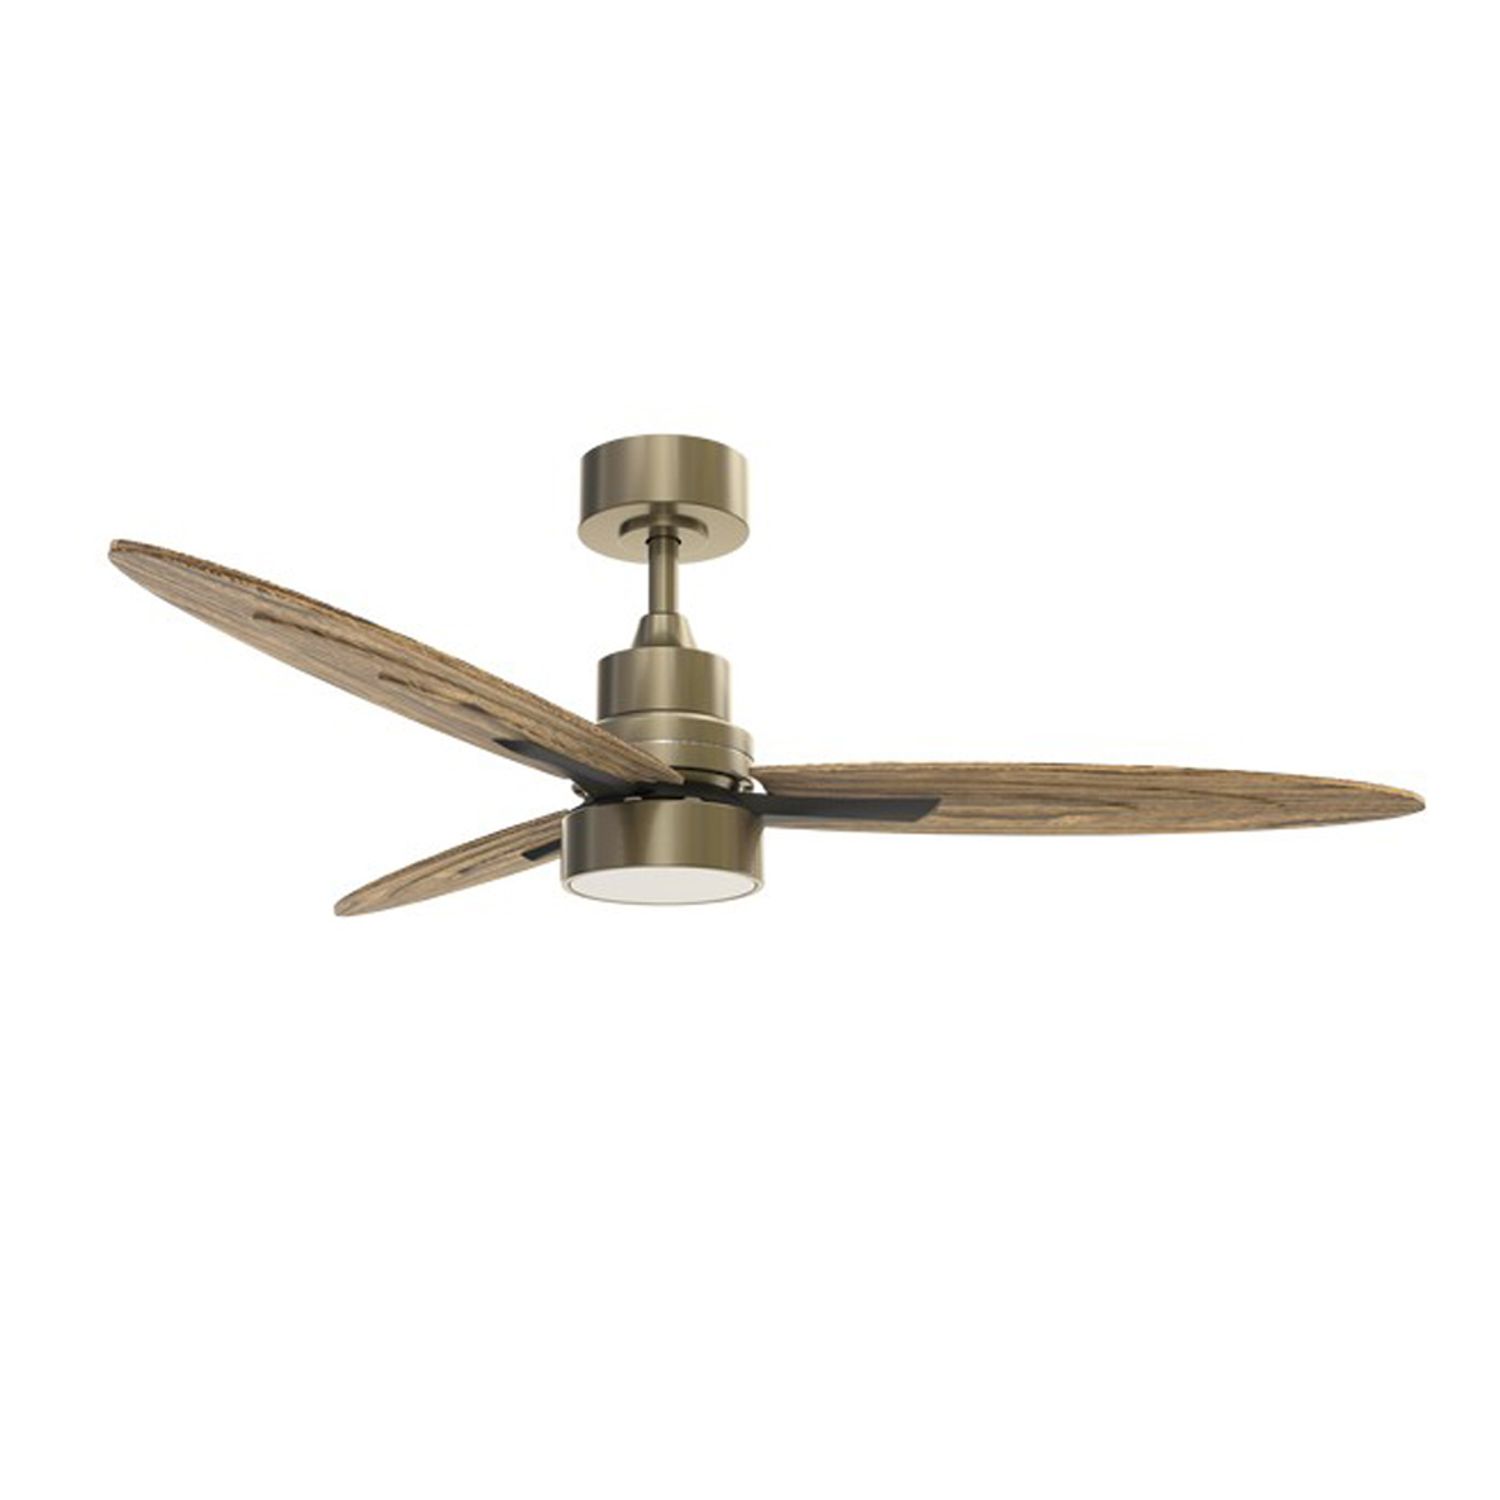 KBS wholesale brass and Wooden Design Ceiling Fan with Light, Reverse Function & Remote Control flush mount